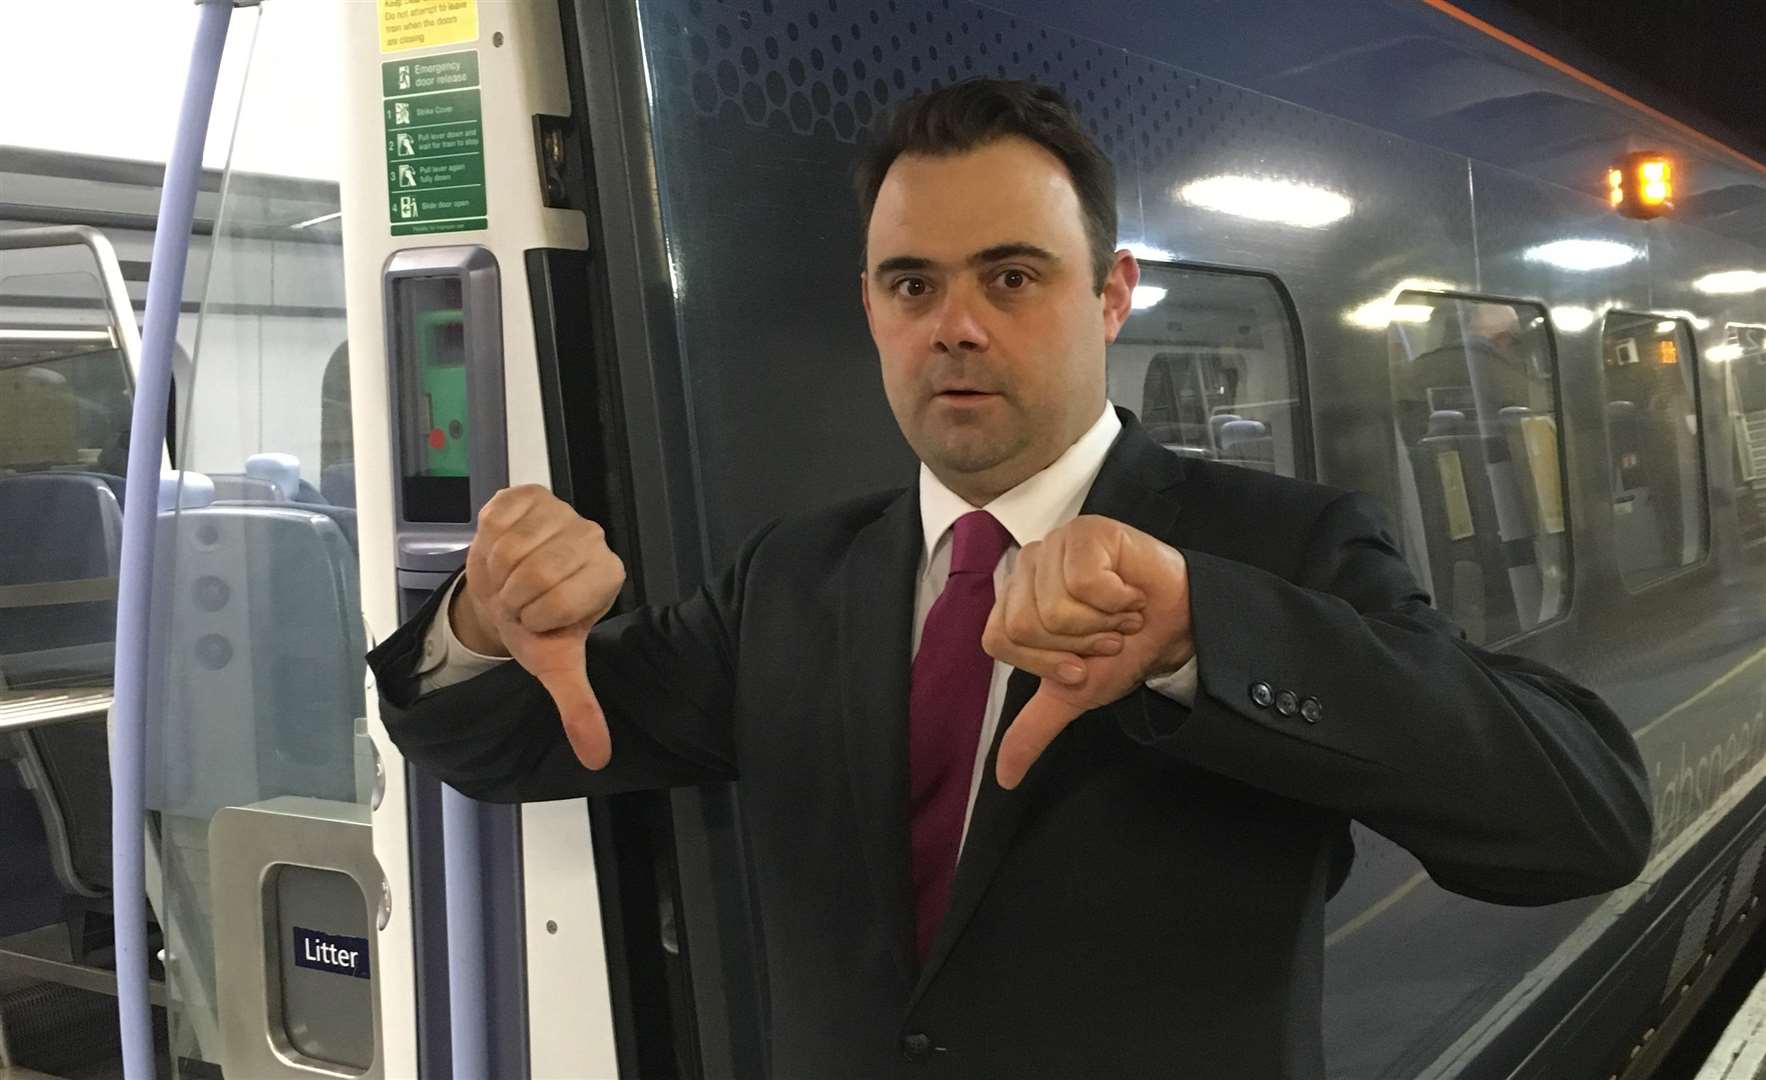 Transport campaigner James Willis has slammed the government for not revealing details behind plans to cut Maidstone's high speed trains to the capital (2670876)